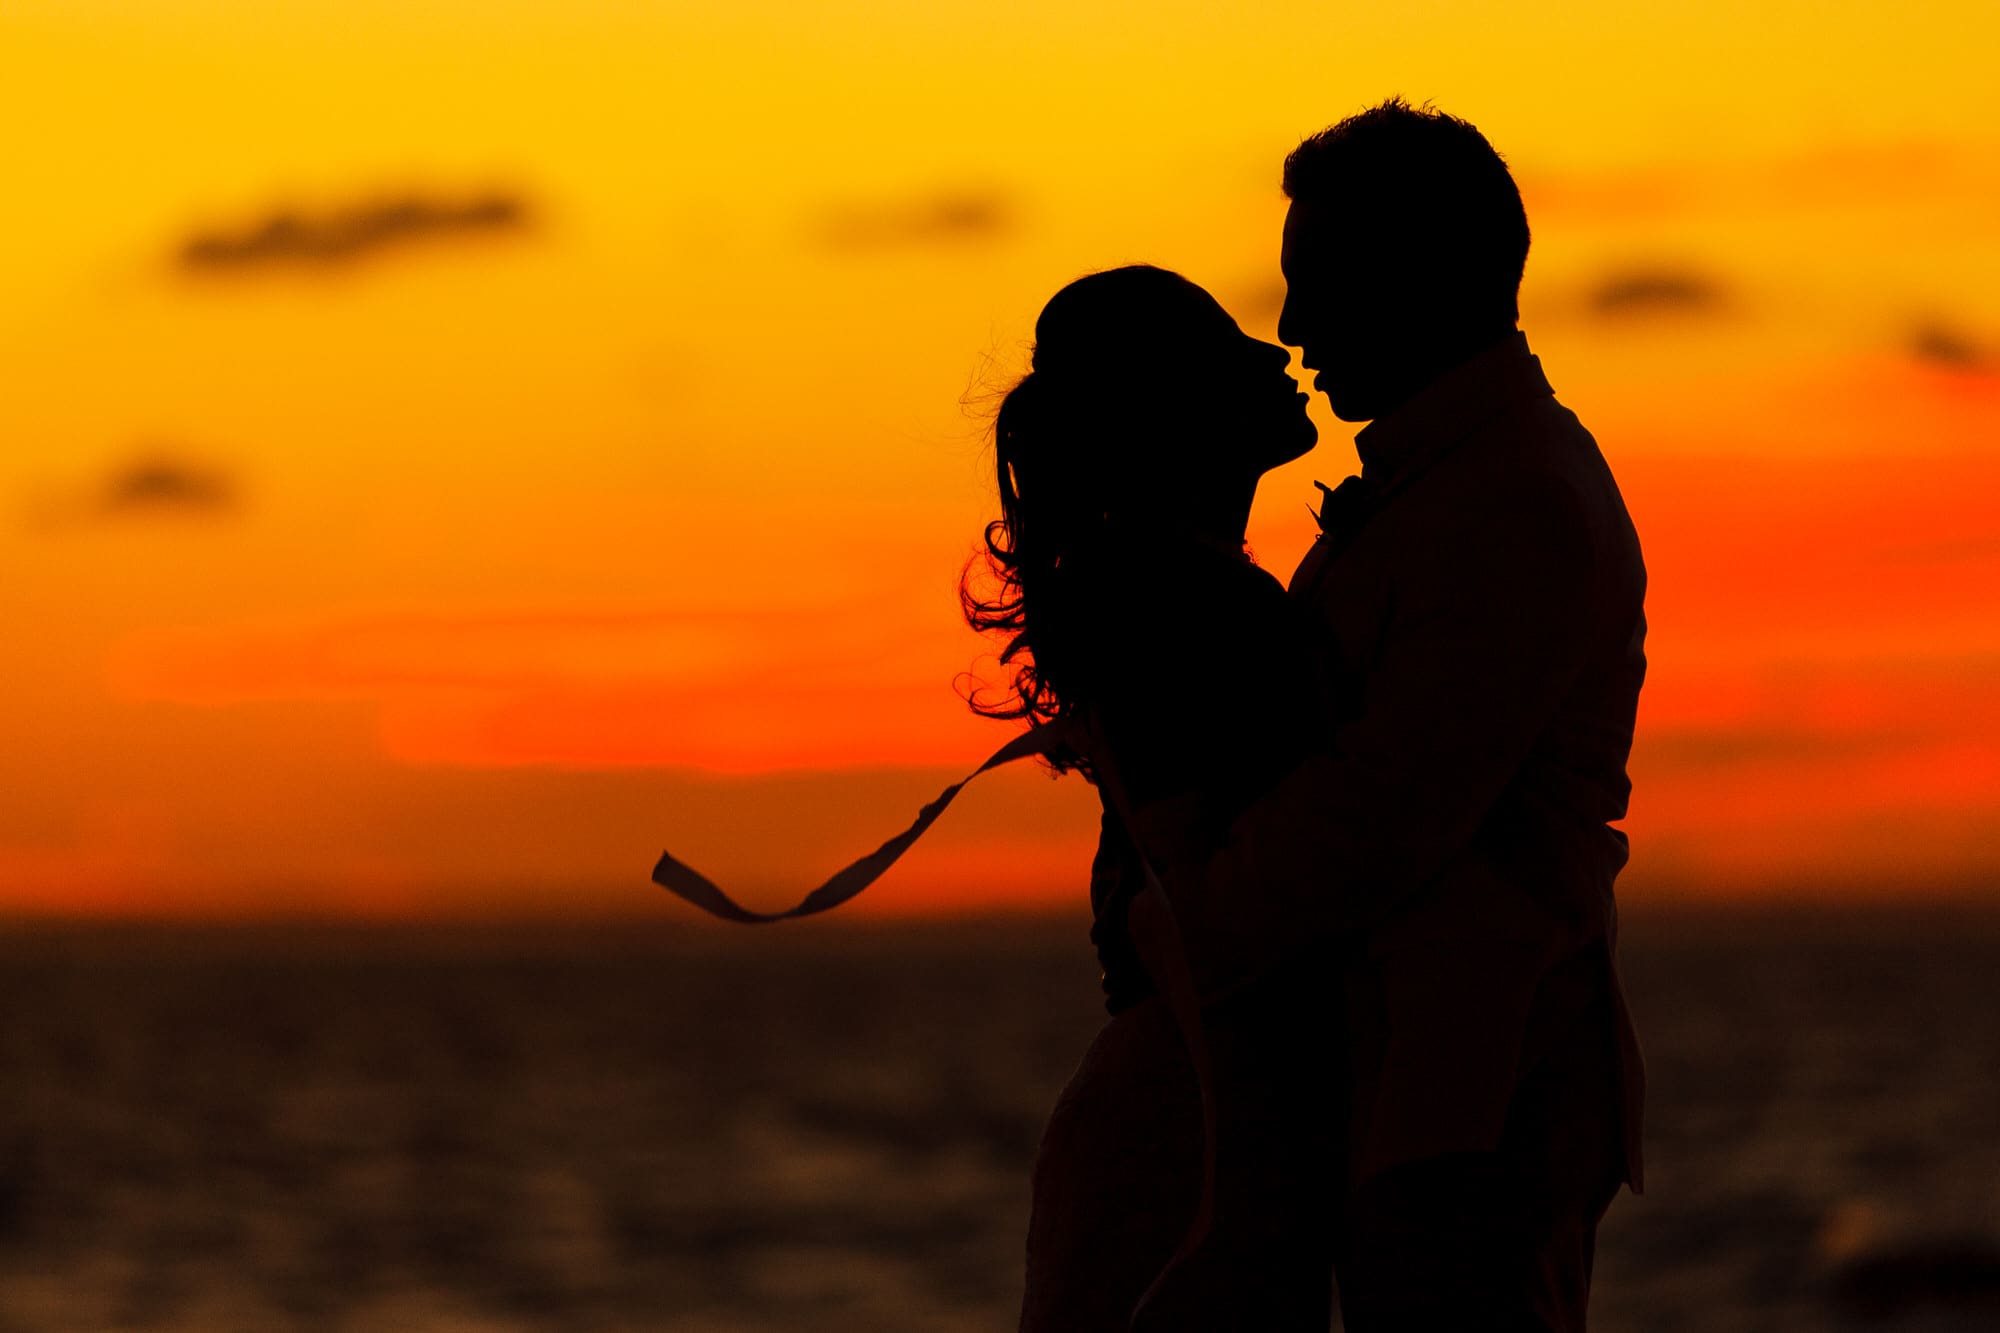 Bride and groom sunset silhouette on Grace Bay beach, Turks & Caicos Islands BWI